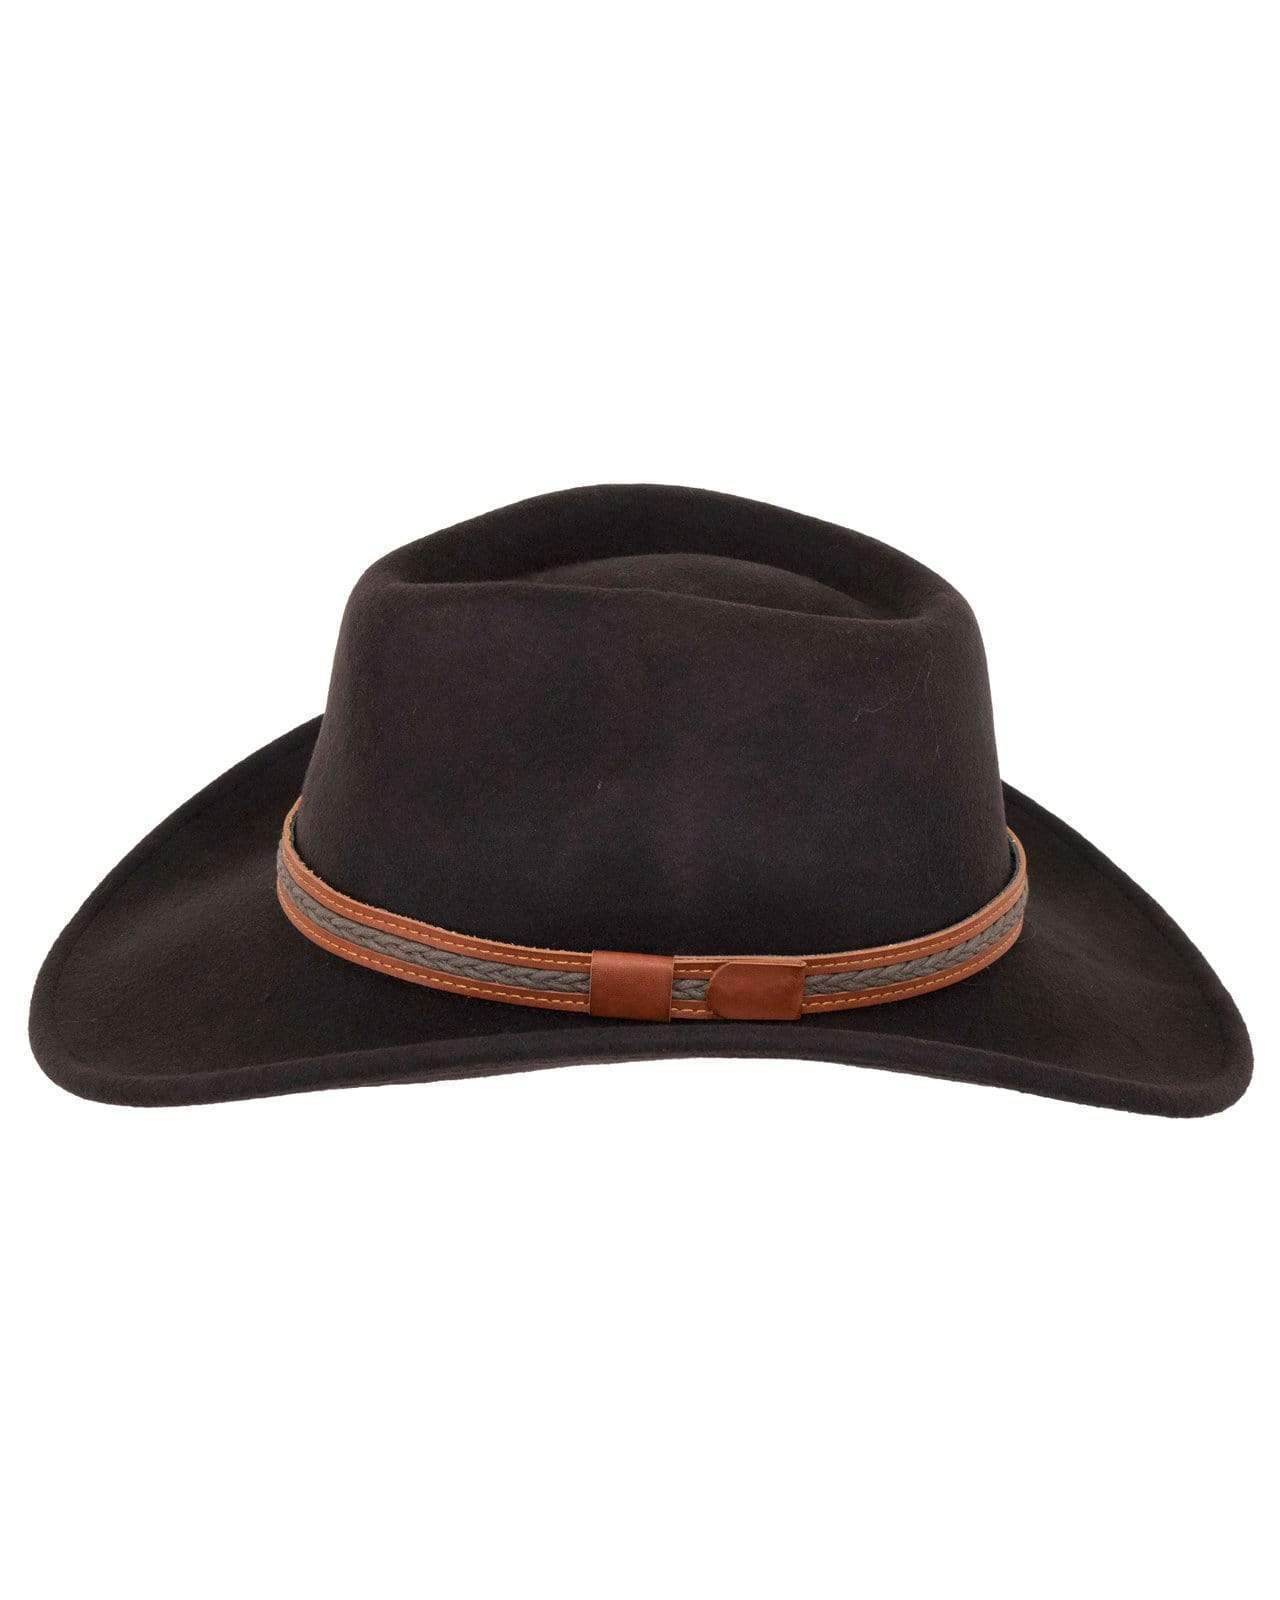 Outback Trading Co. High Country Wool Hat Tanbark Medium